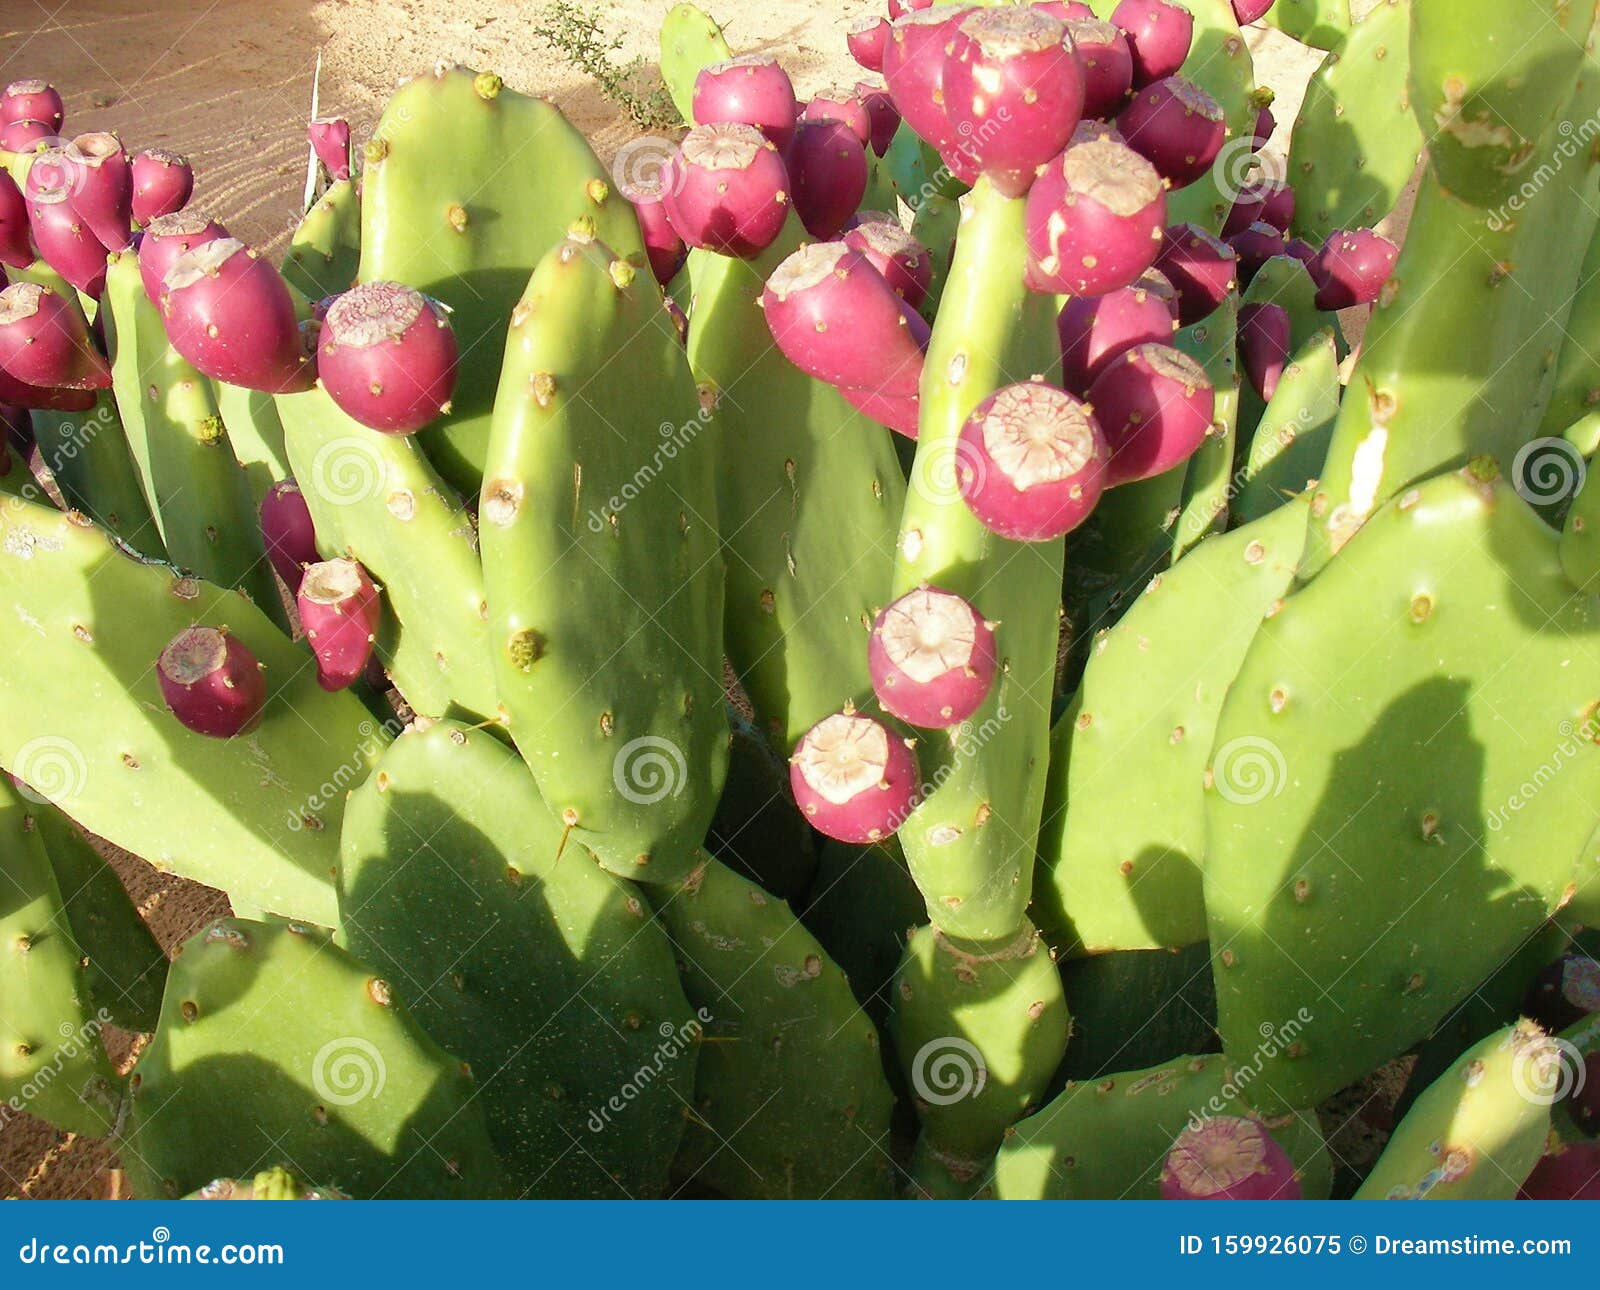 328 Desert Cactus Sahara Photos Free Royalty Free Stock Photos From Dreamstime,How Much Is A Roll Of Dimes Canada